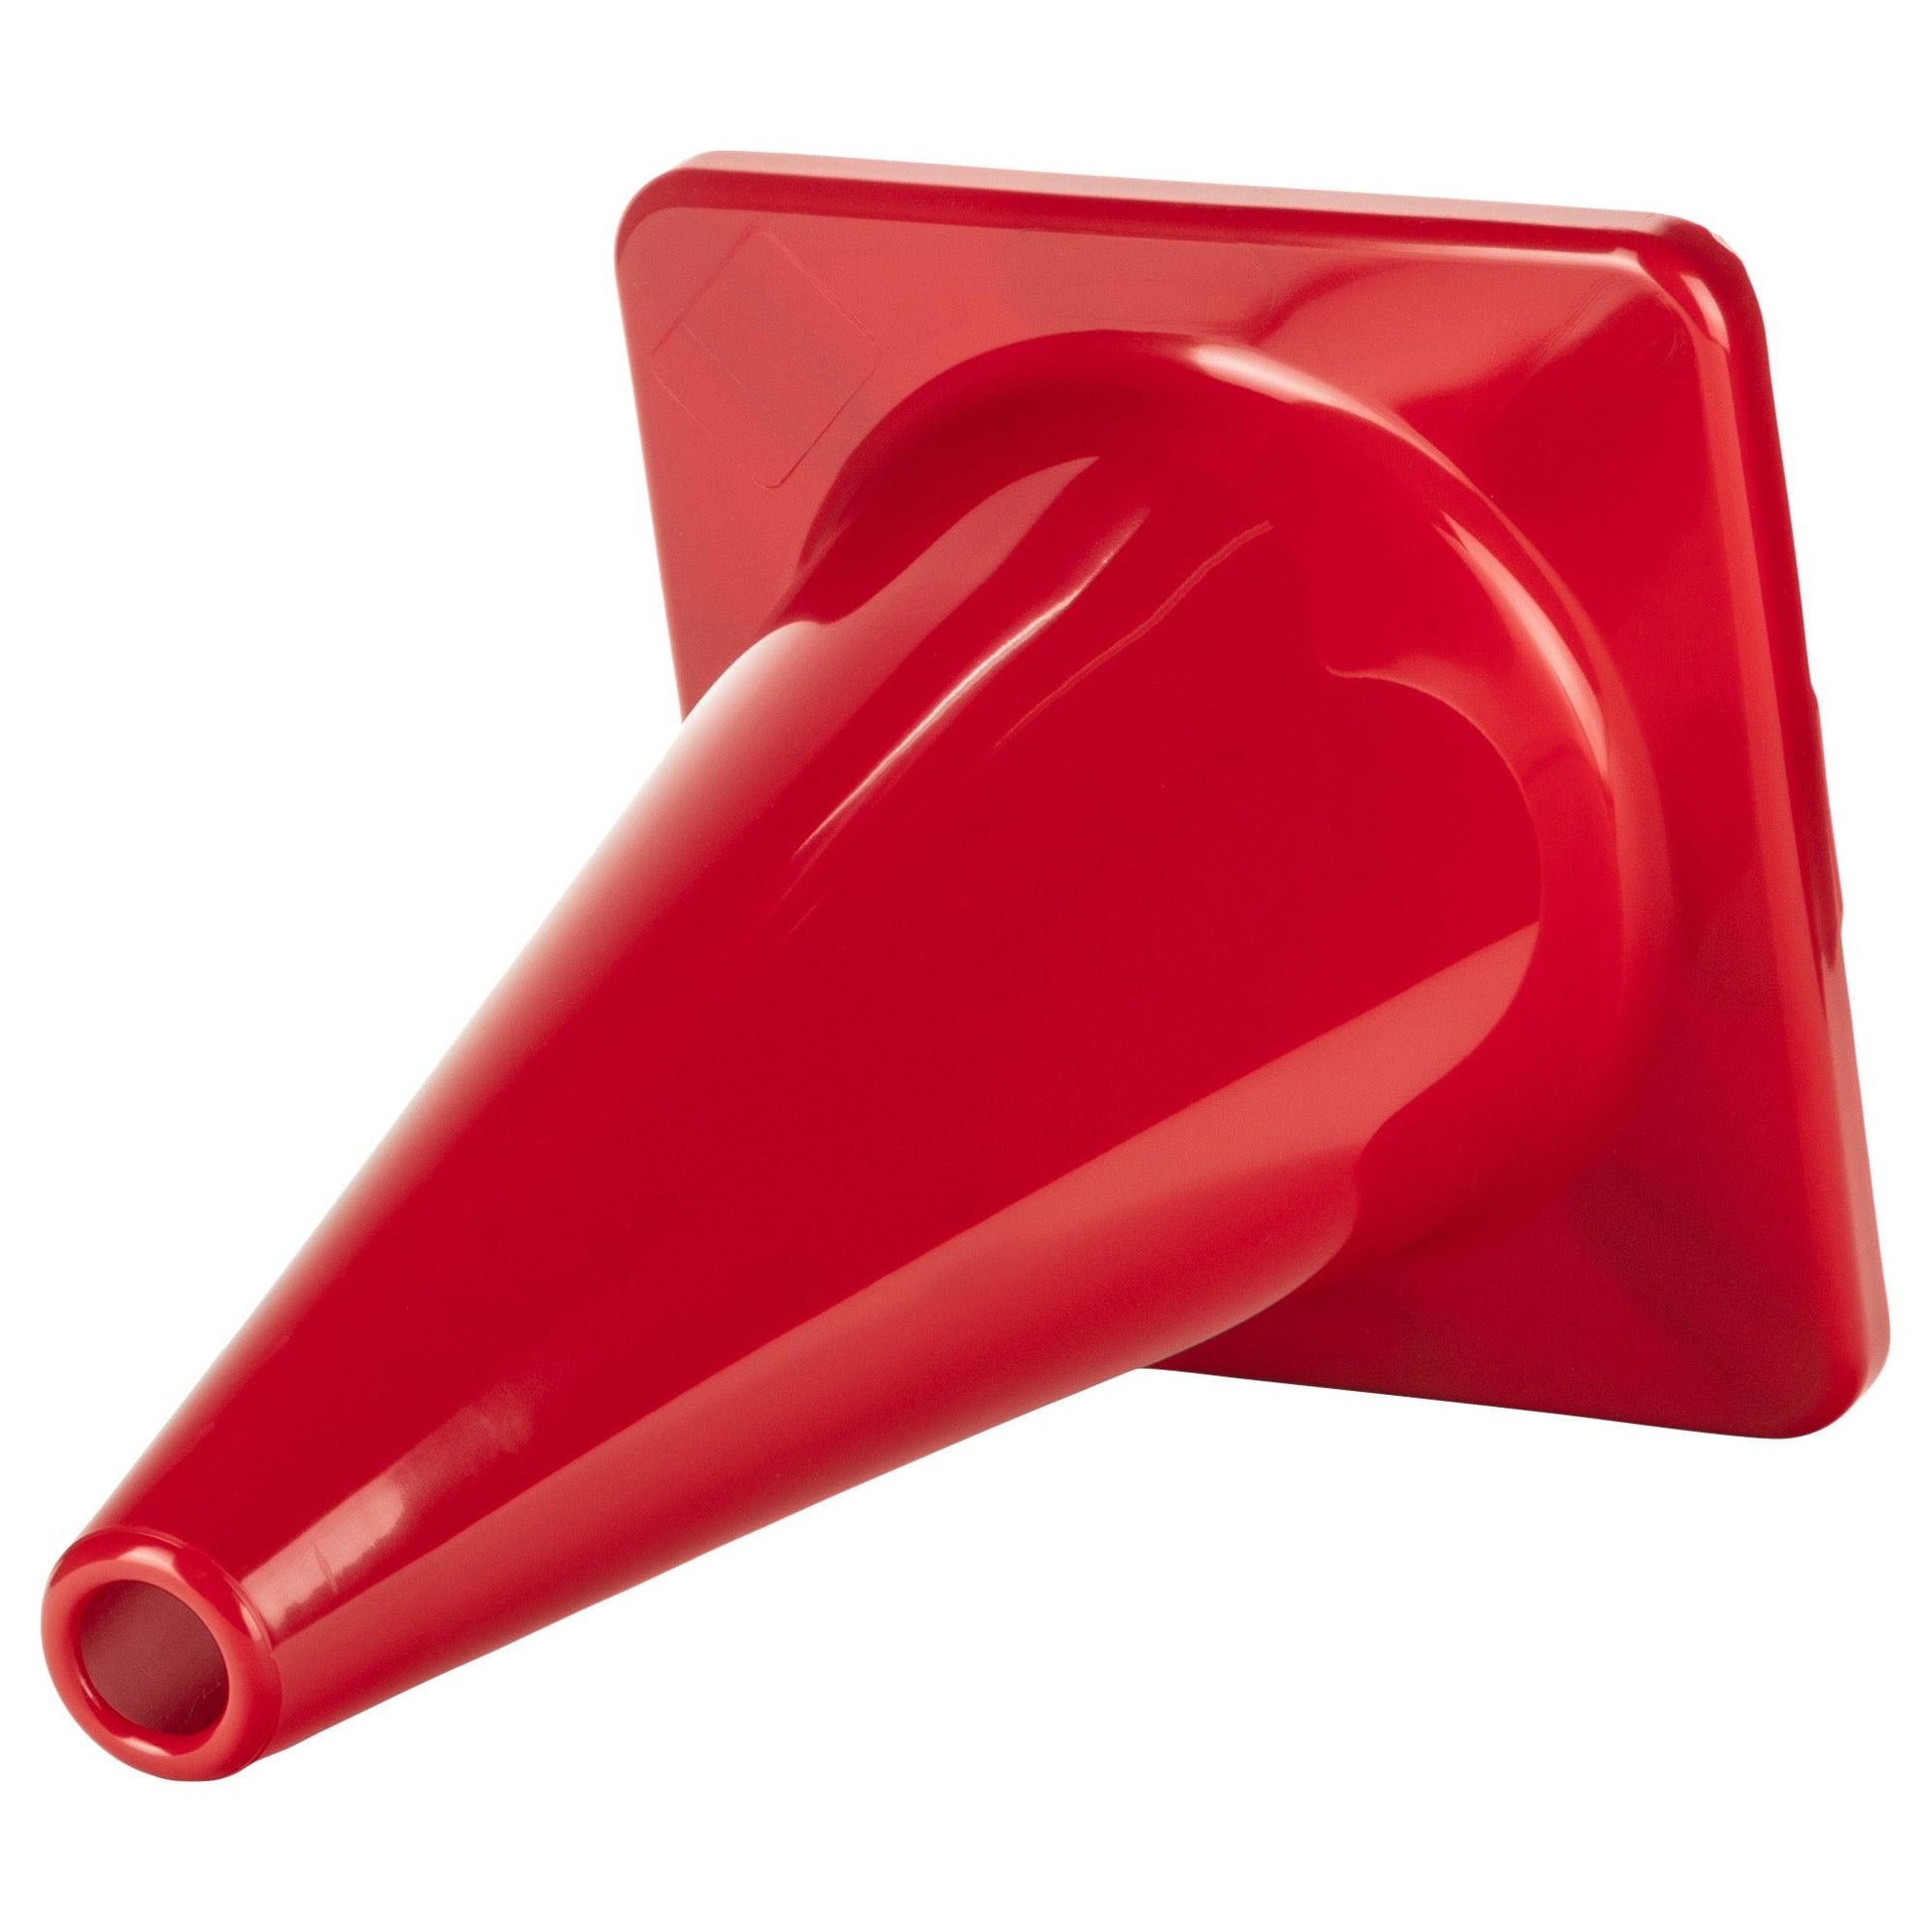 Hi-Visibility Flexible Vinyl Cone, weighted, 12", Red - Loomini